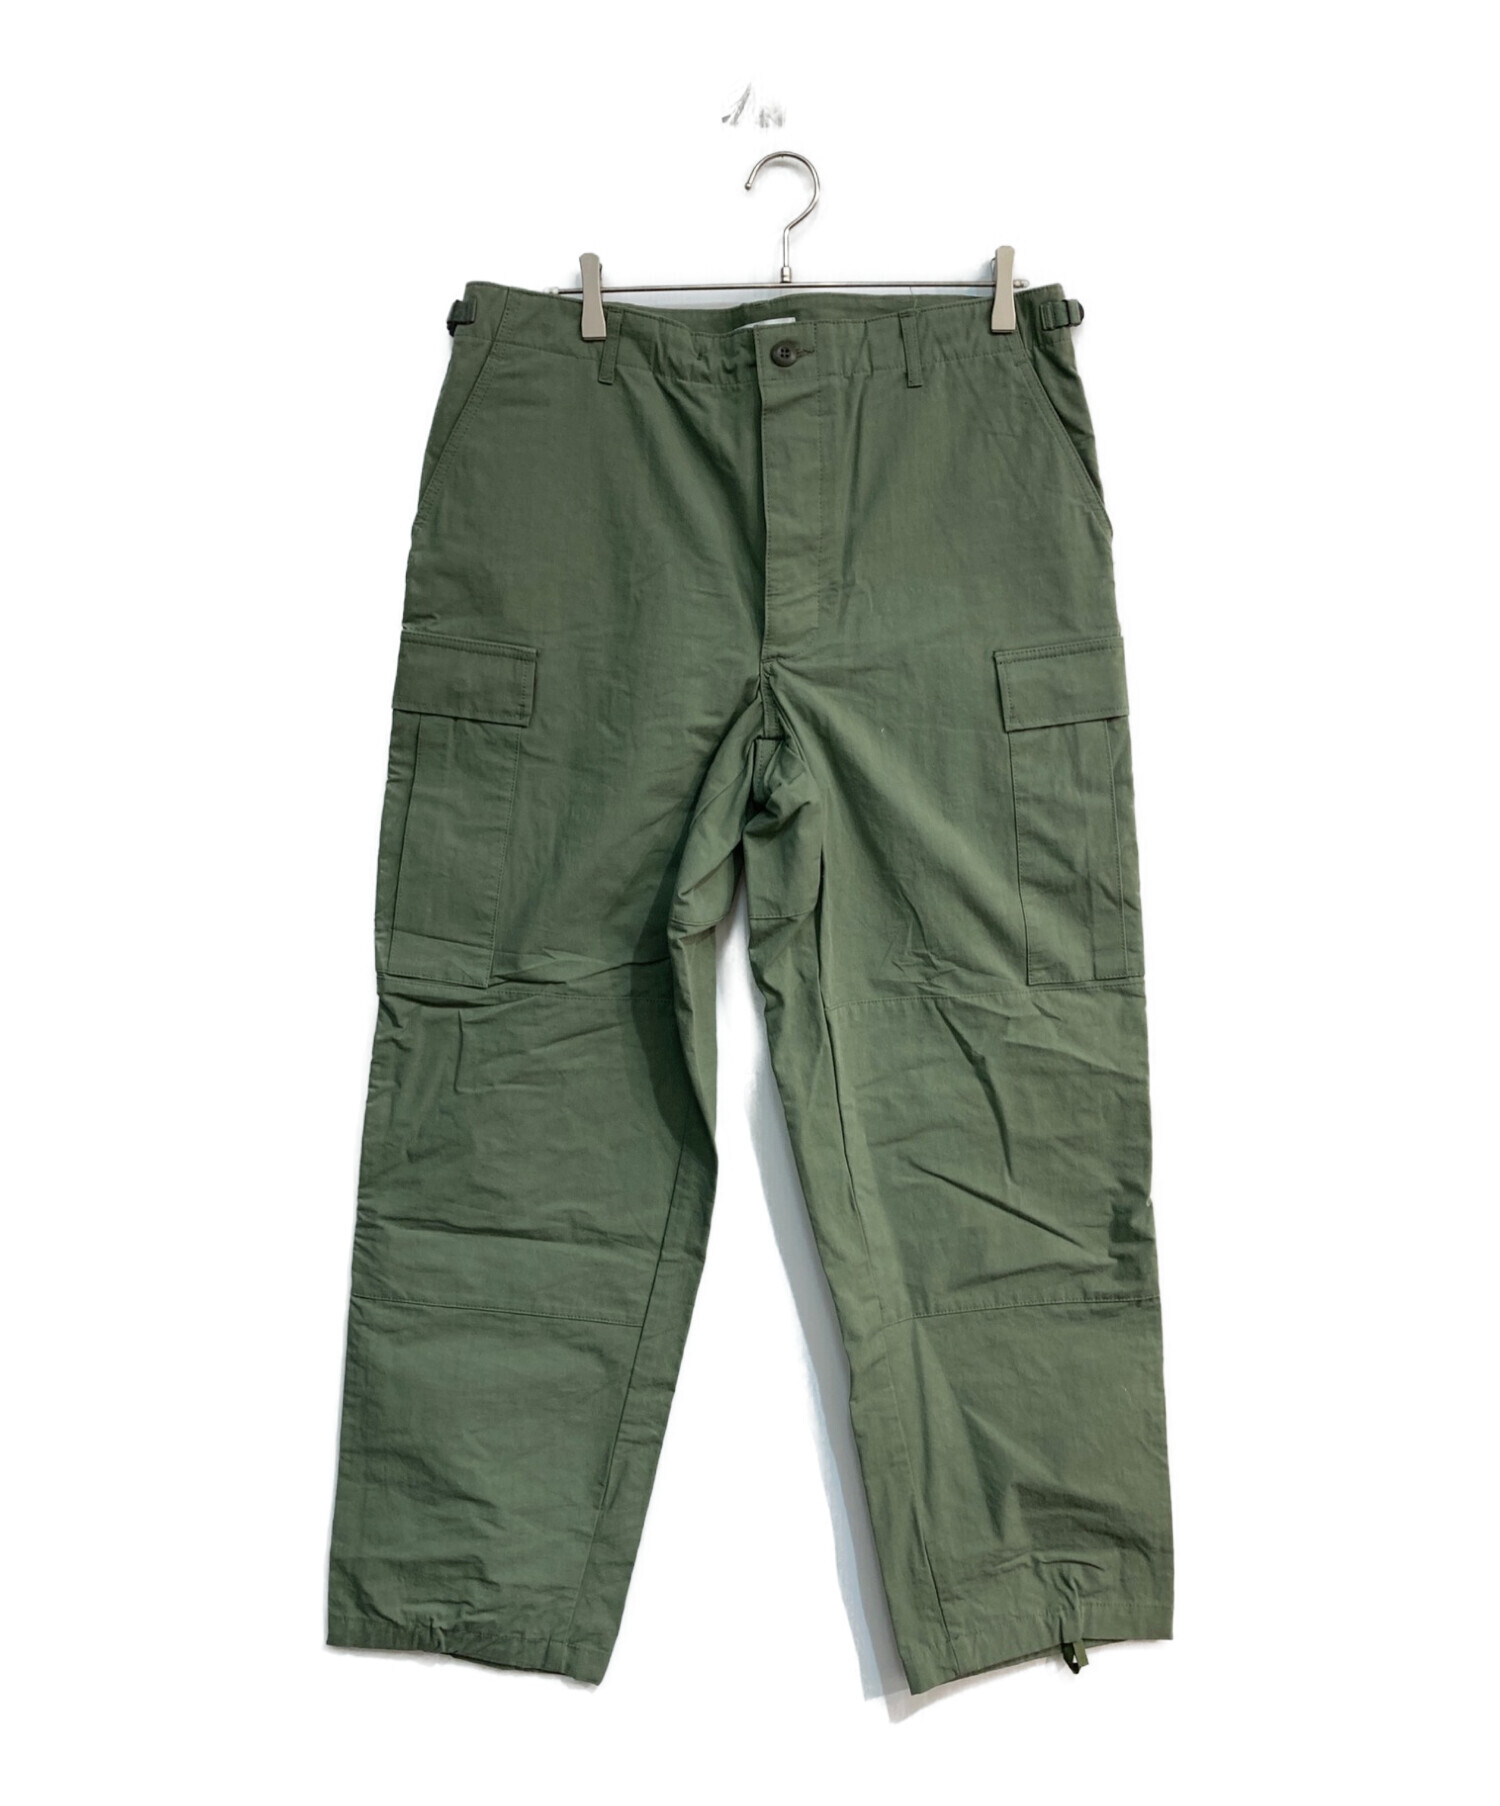 WMILL-TROUSER 01／TROUSERS／NYCO．RIPSTOPWMILL-T - aechril.org